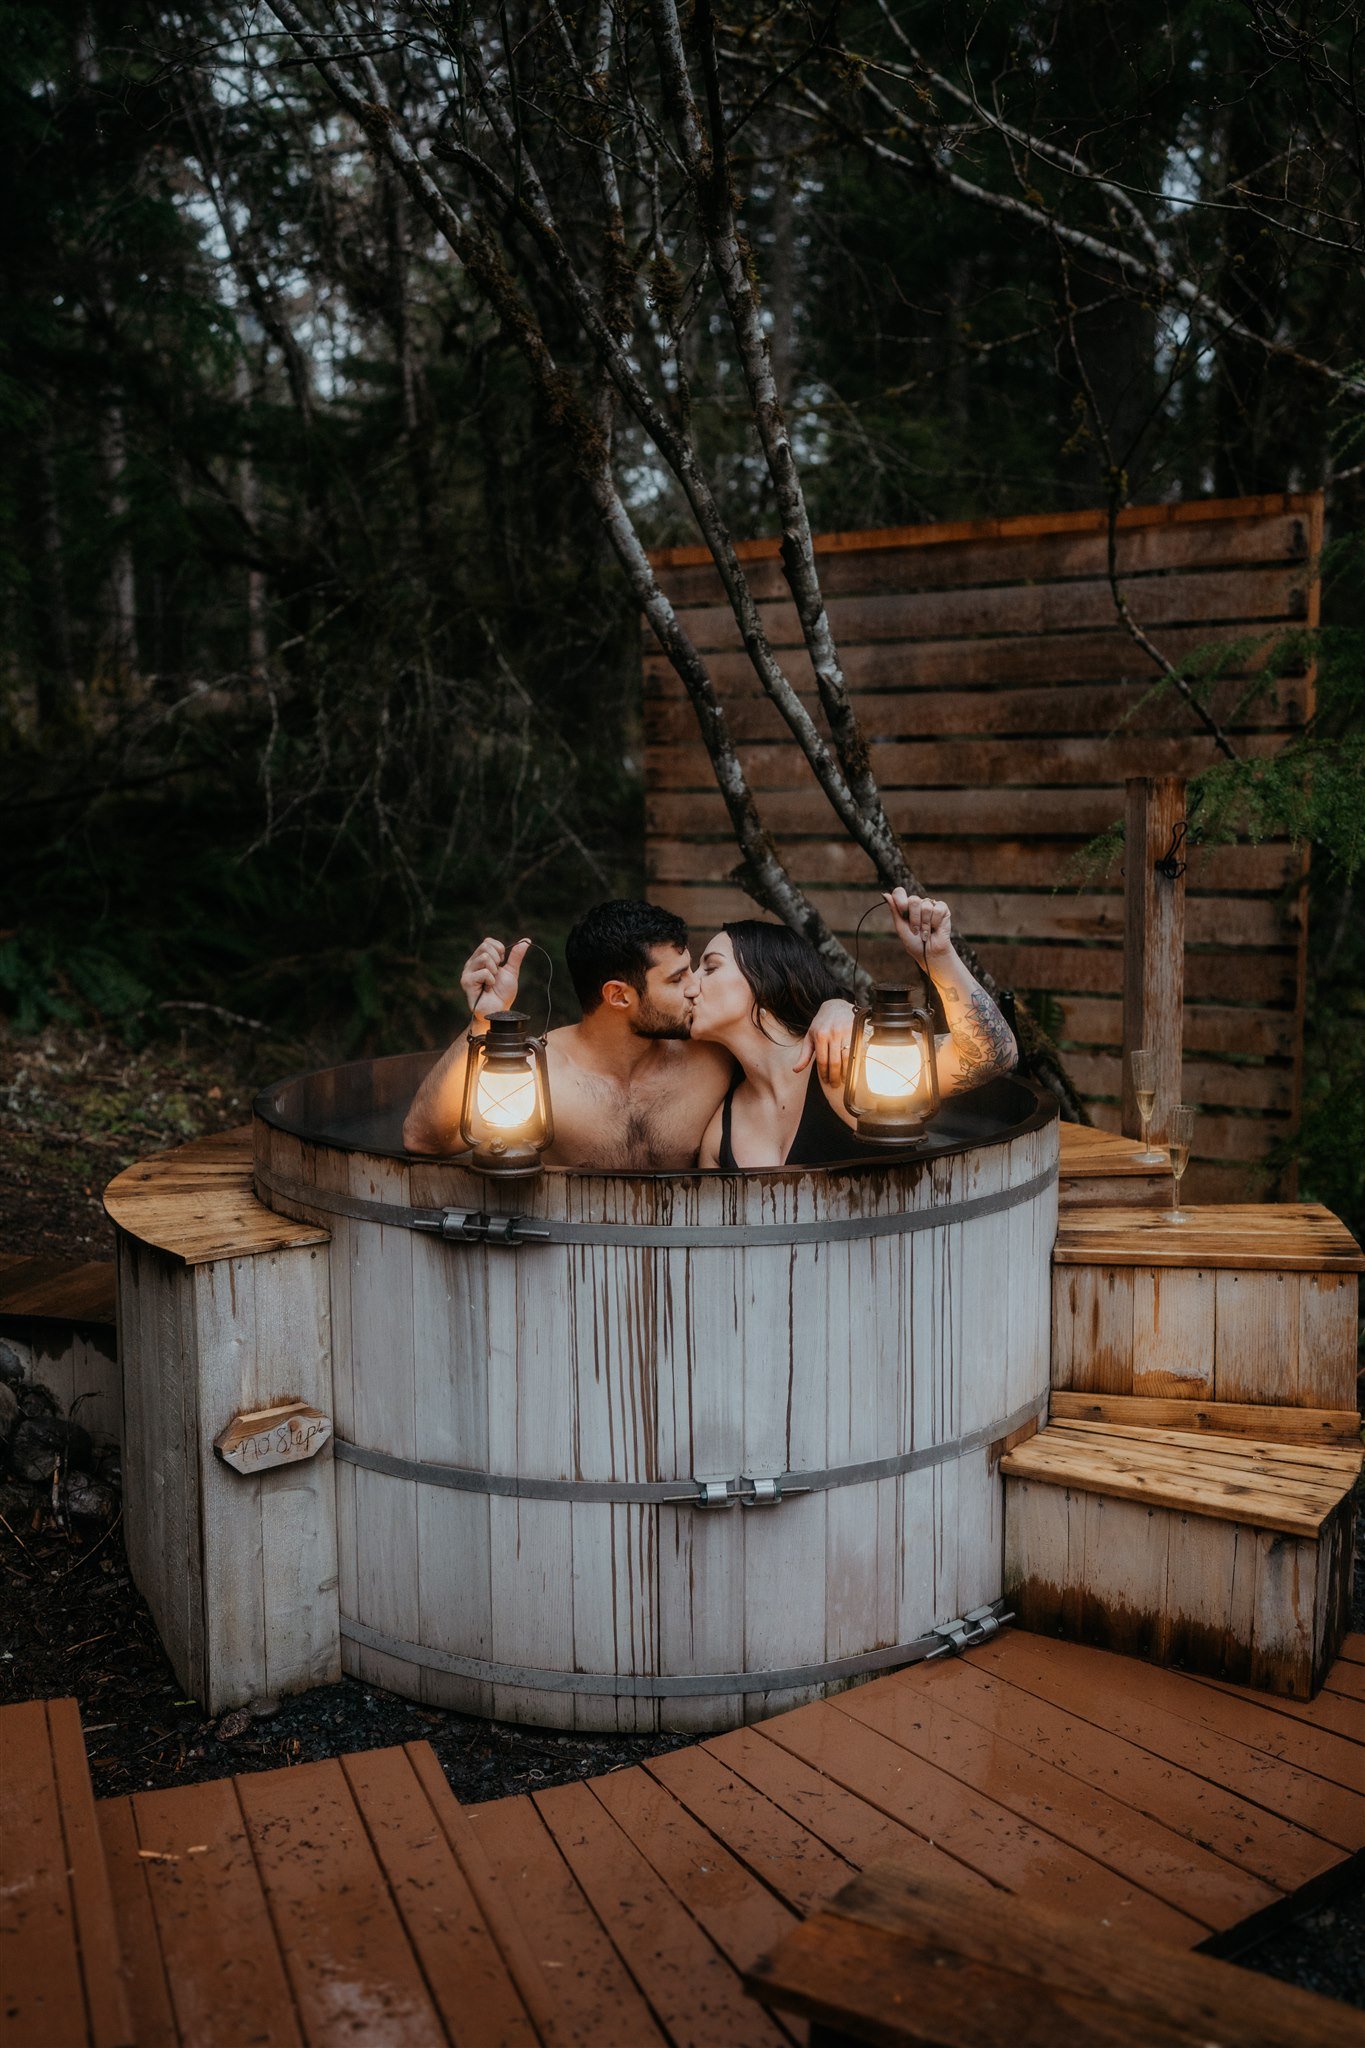 Bride and groom holding lanterns in barrel hot tub after snowy hiking elopement